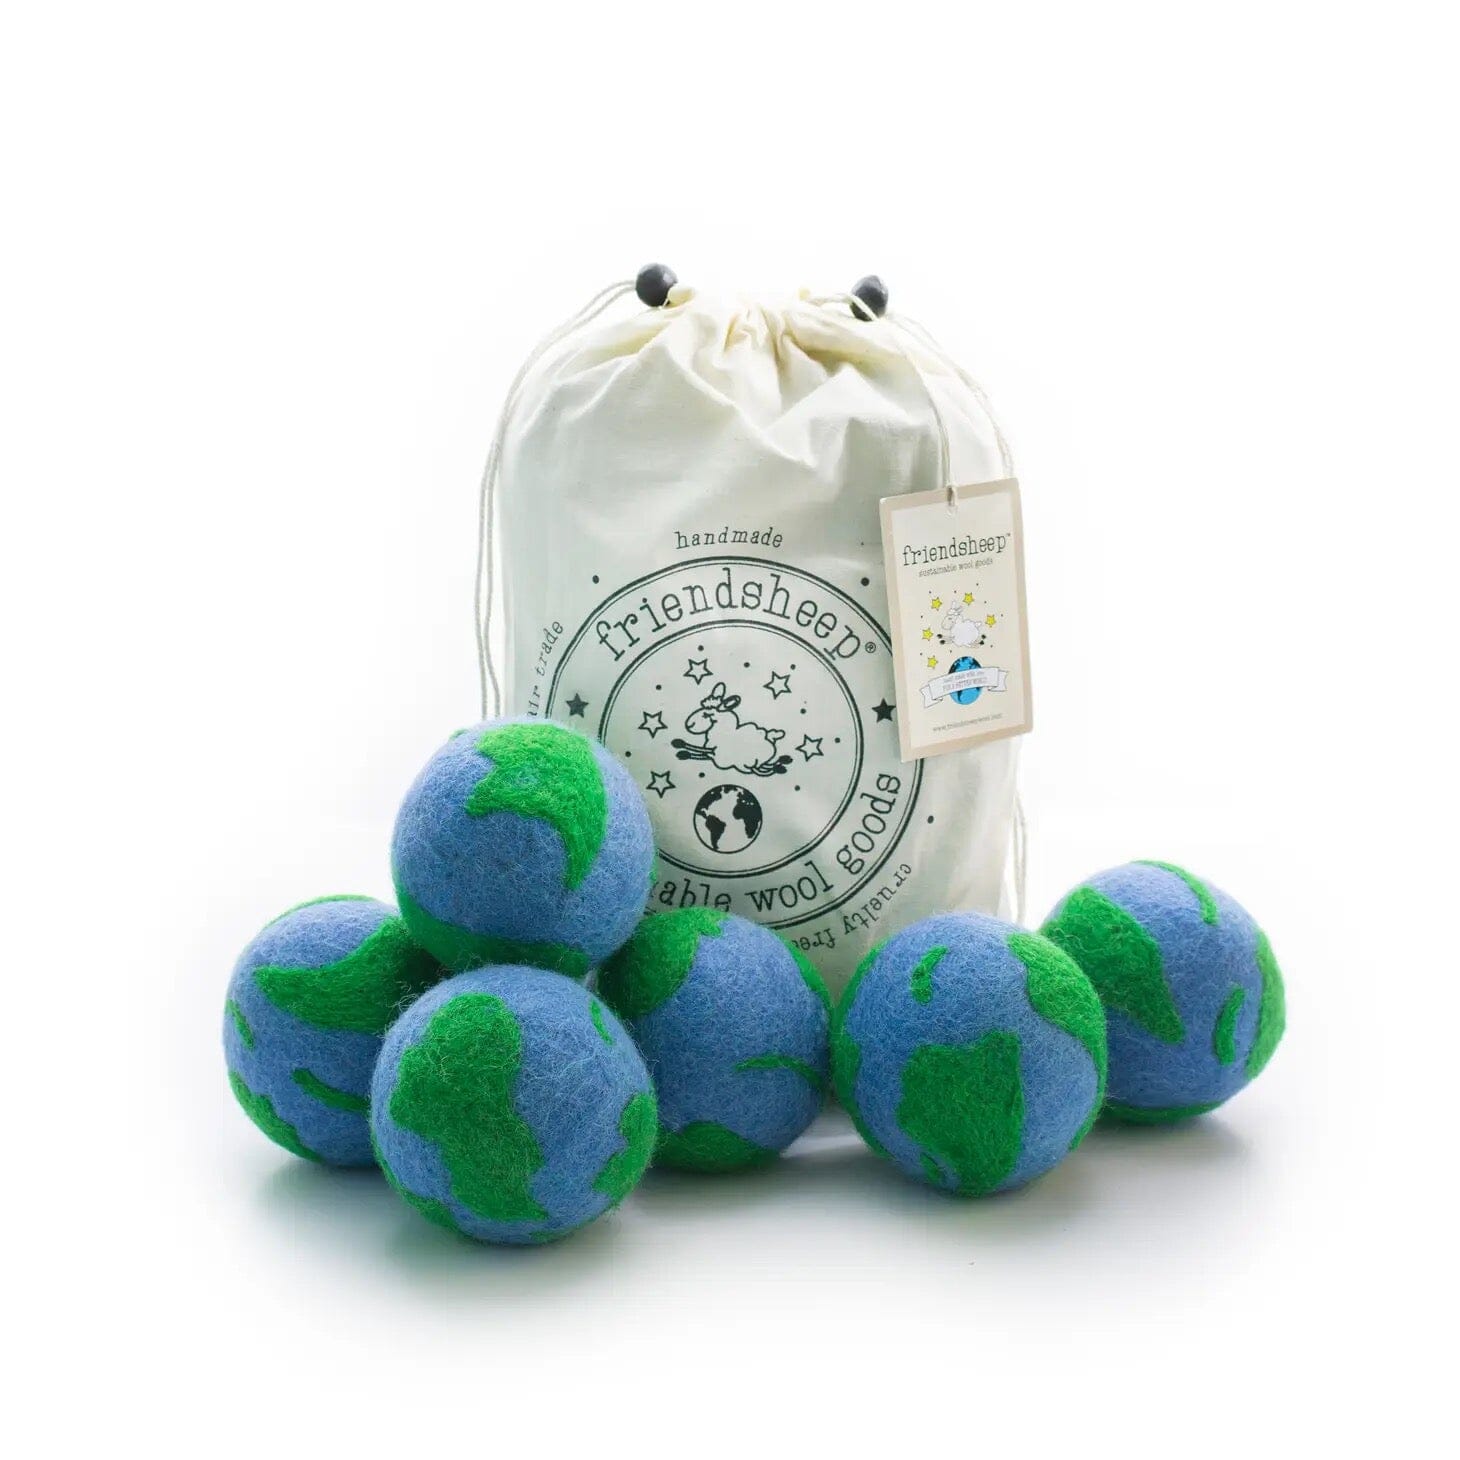 Mix and Match Eco Dryer Balls in Gifts | String Theory Yarn Co